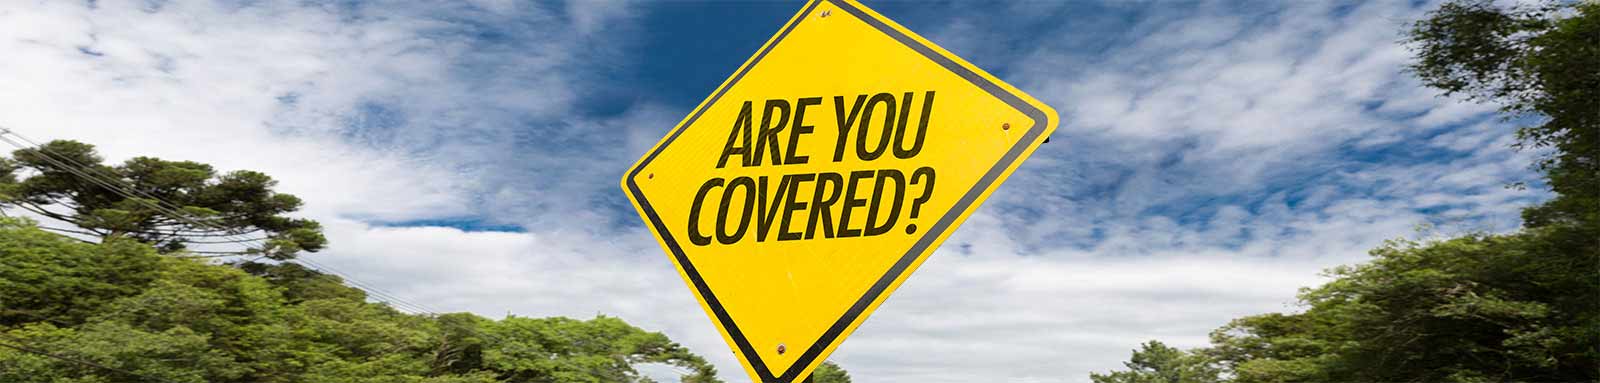 Are you covered? sign post